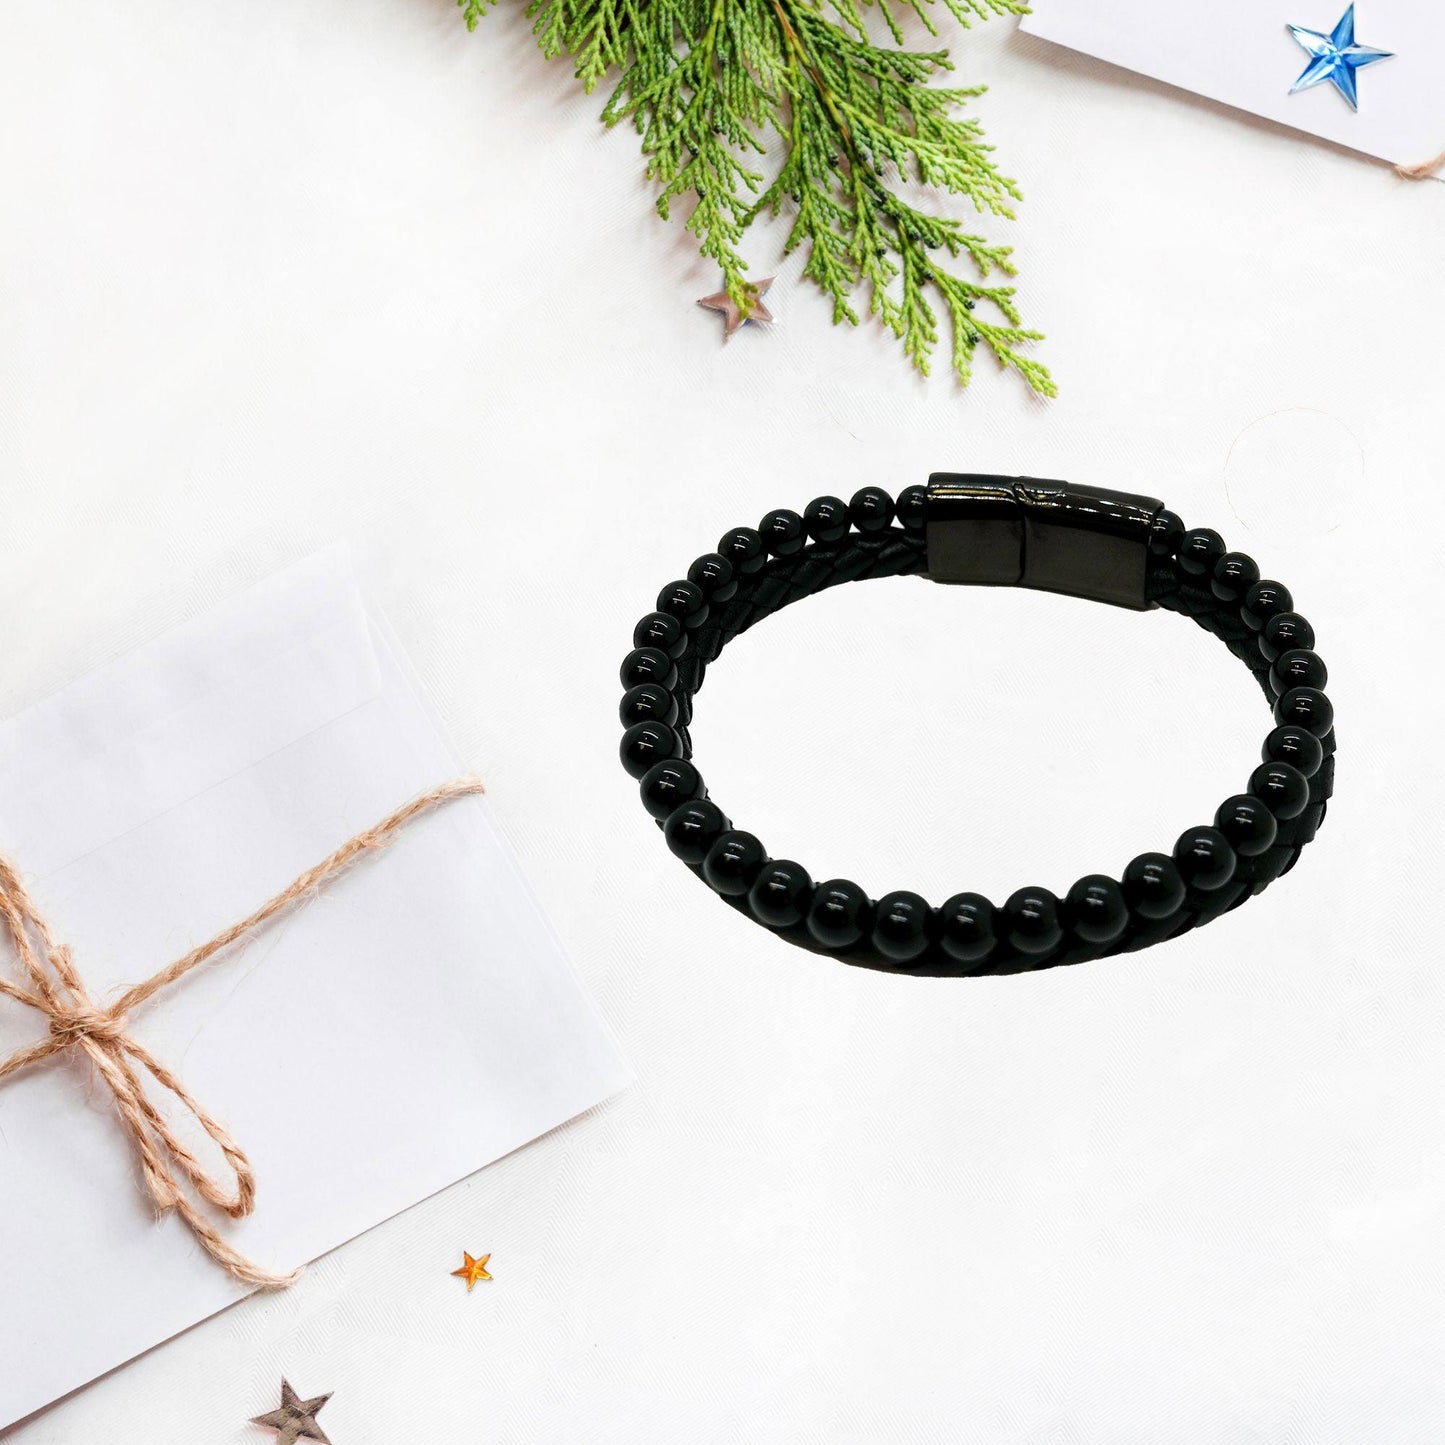 Accountant Black Braided Stone Leather Bracelet - Thanks for being who you are - Birthday Christmas Jewelry Gifts Coworkers Colleague Boss - Mallard Moon Gift Shop